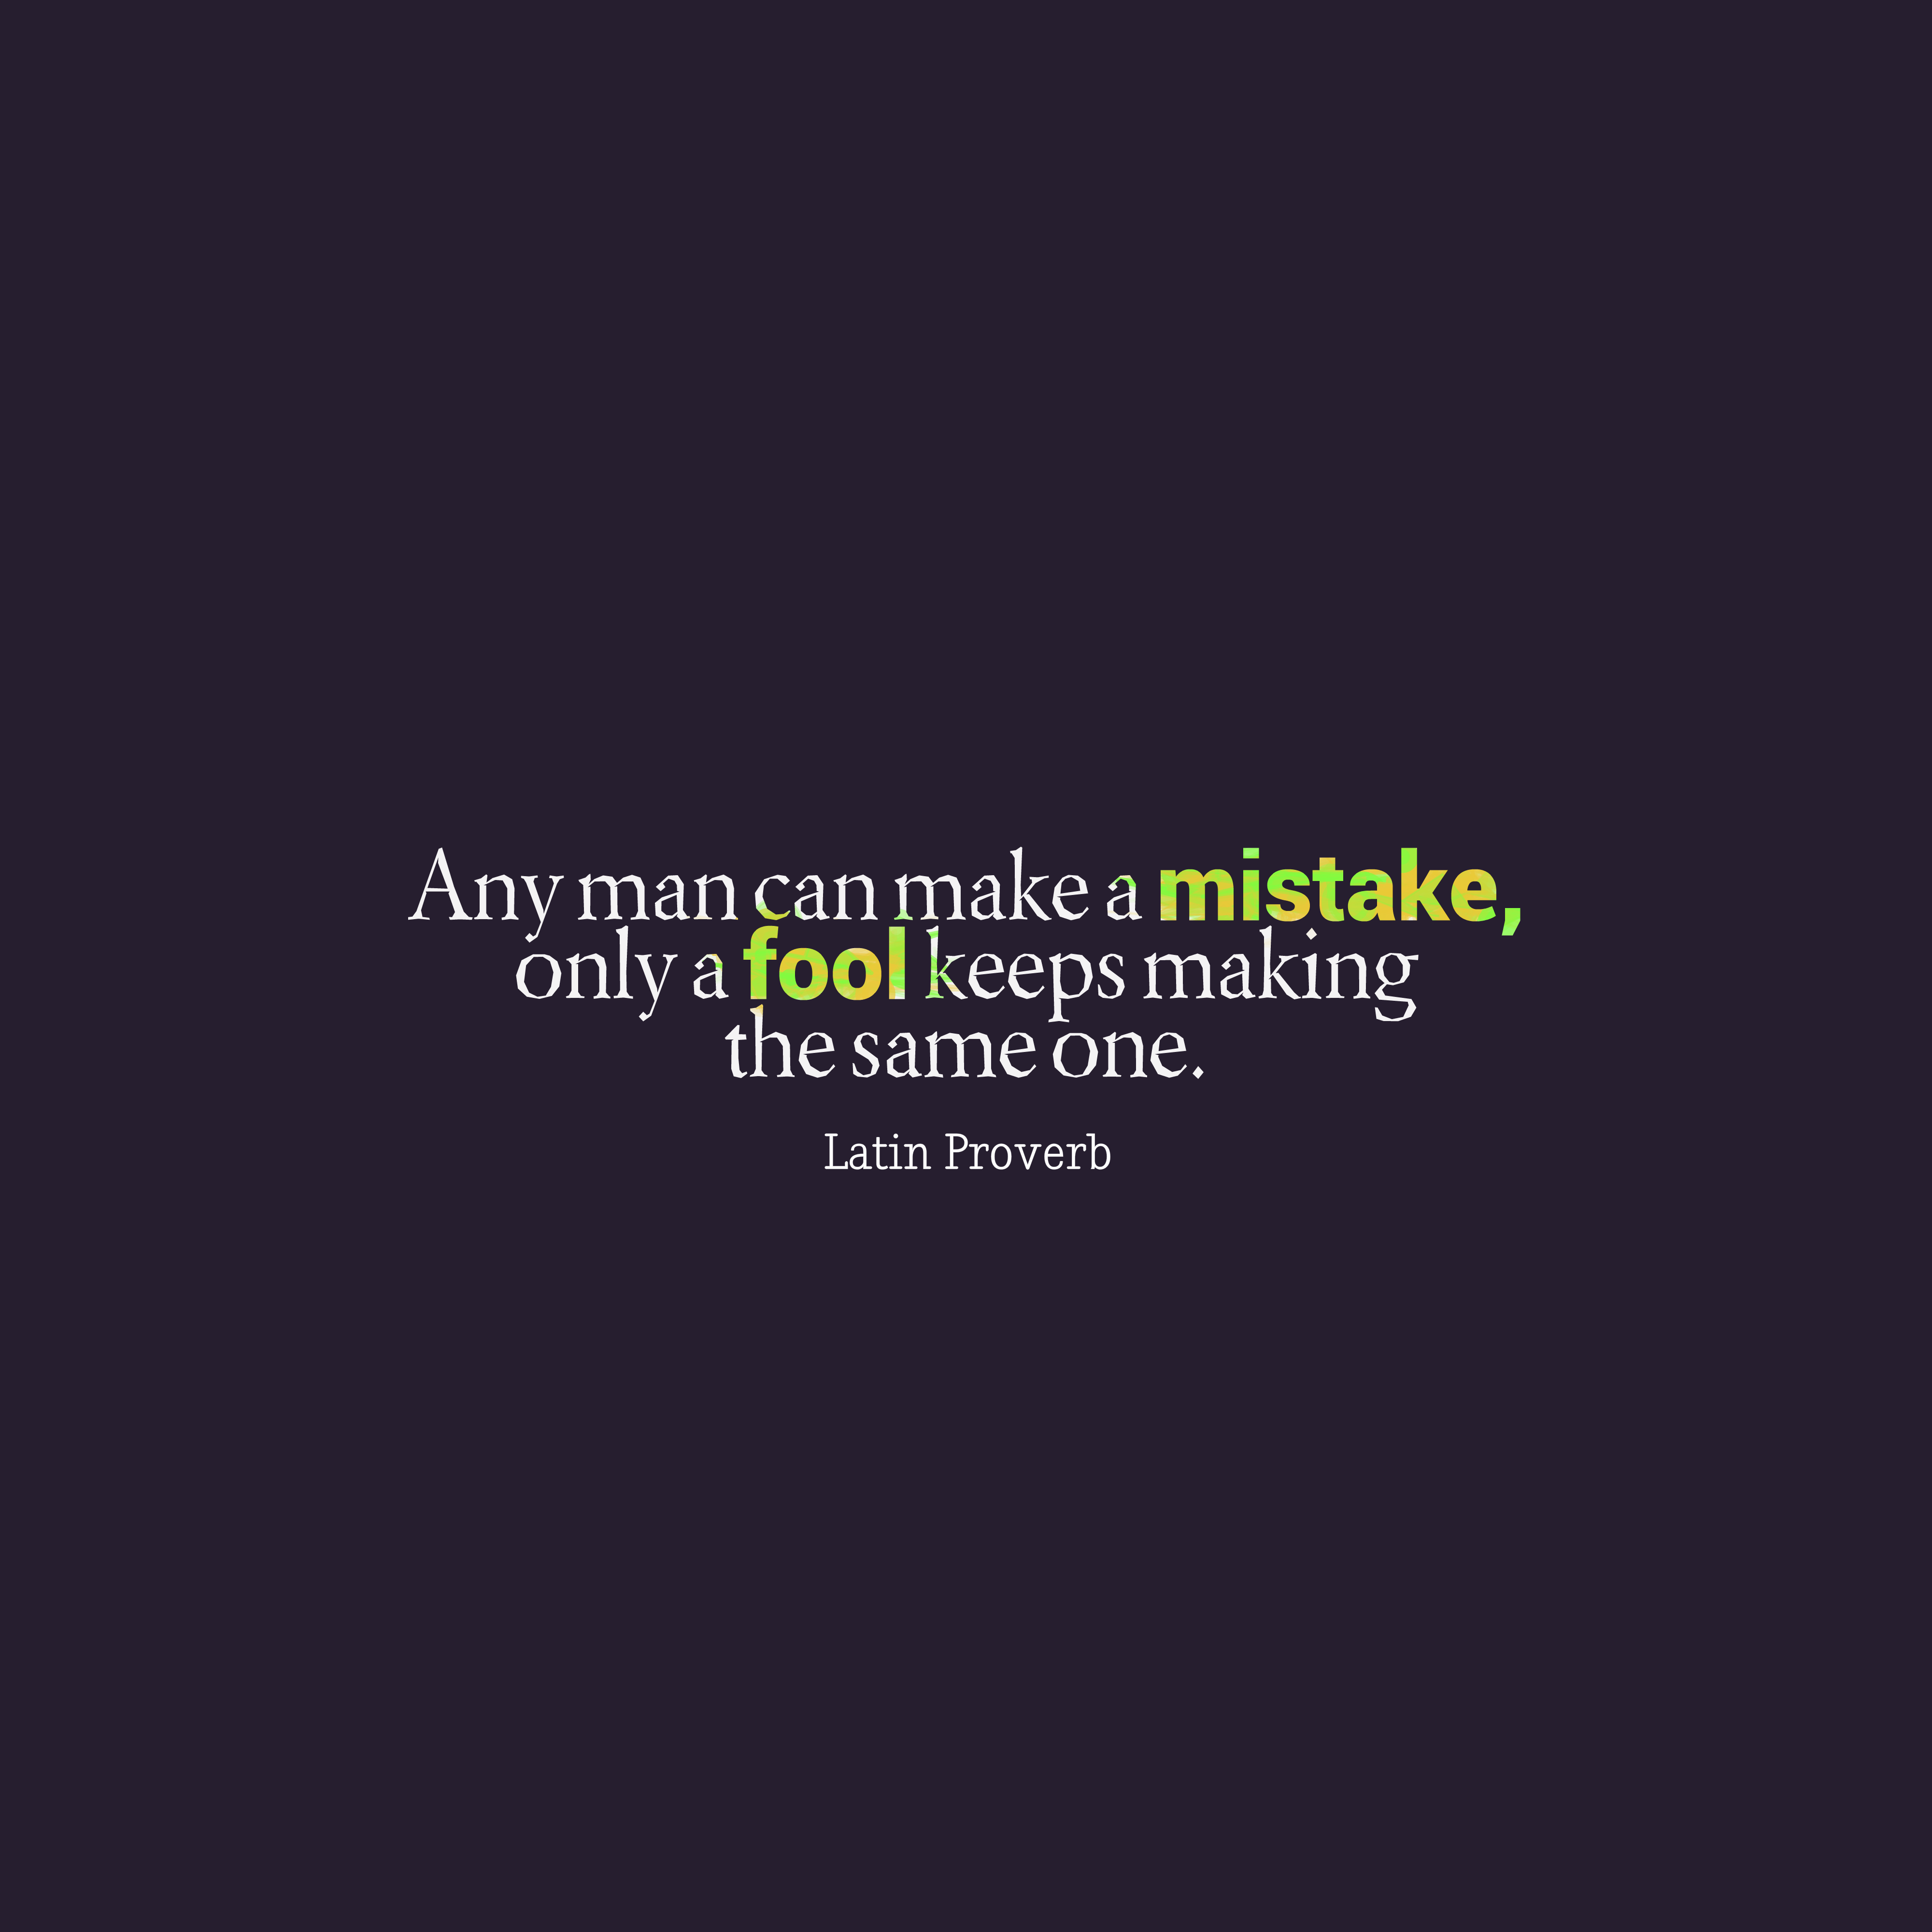 any man can make a mistake, only a fool keeps making the same one. latin proverb